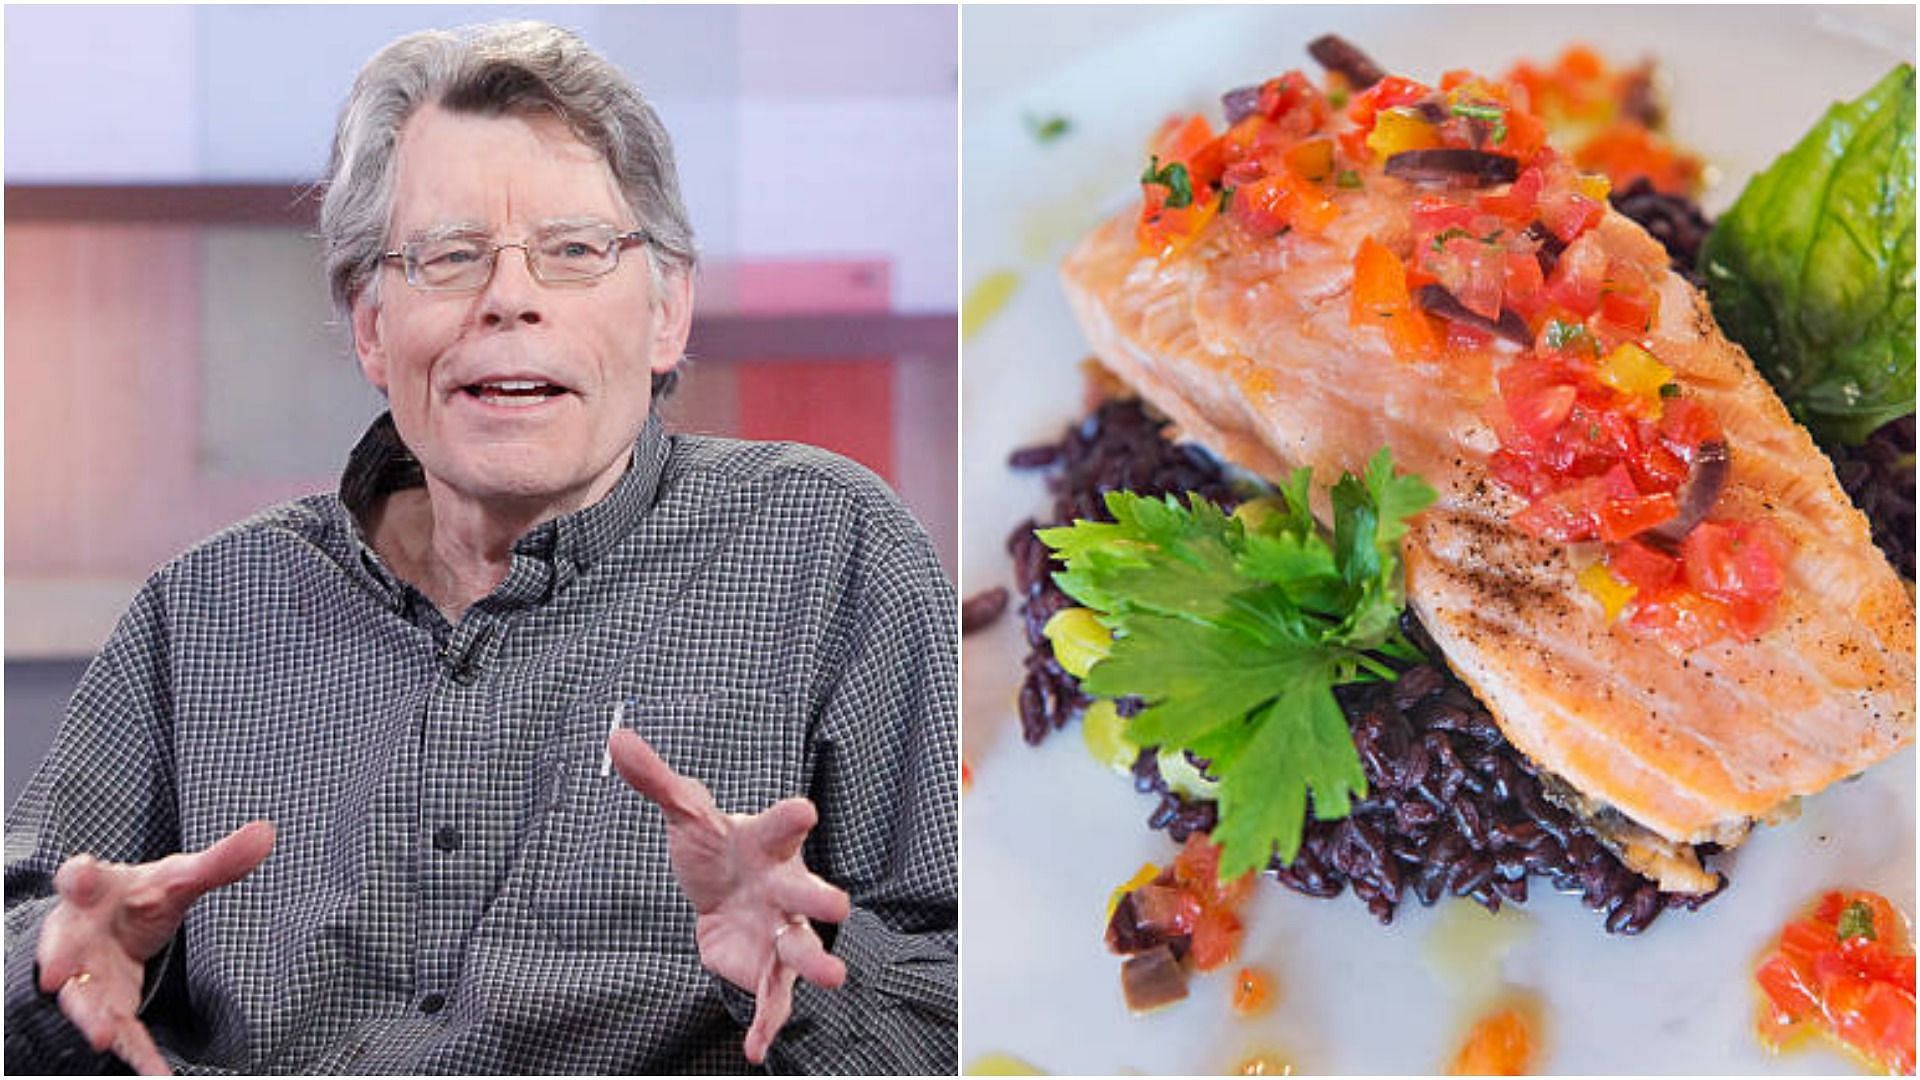 Stephen King&#039;s salmon recipe wasn&#039;t received well by Twitter users (Image via Lou Rocco and Tom Williams/Getty Images)